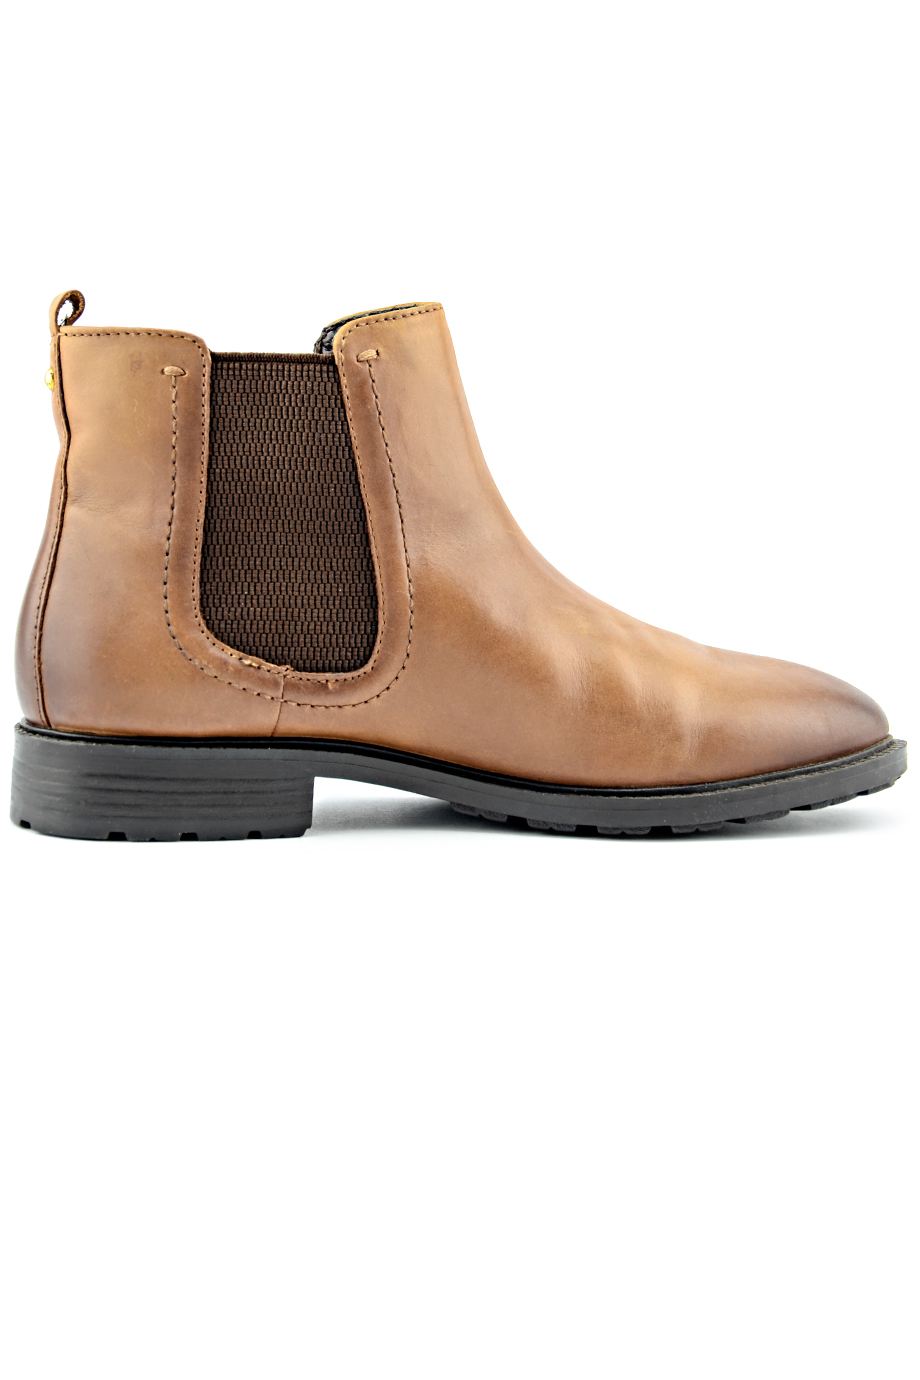 TU Leather Boots/ Brown